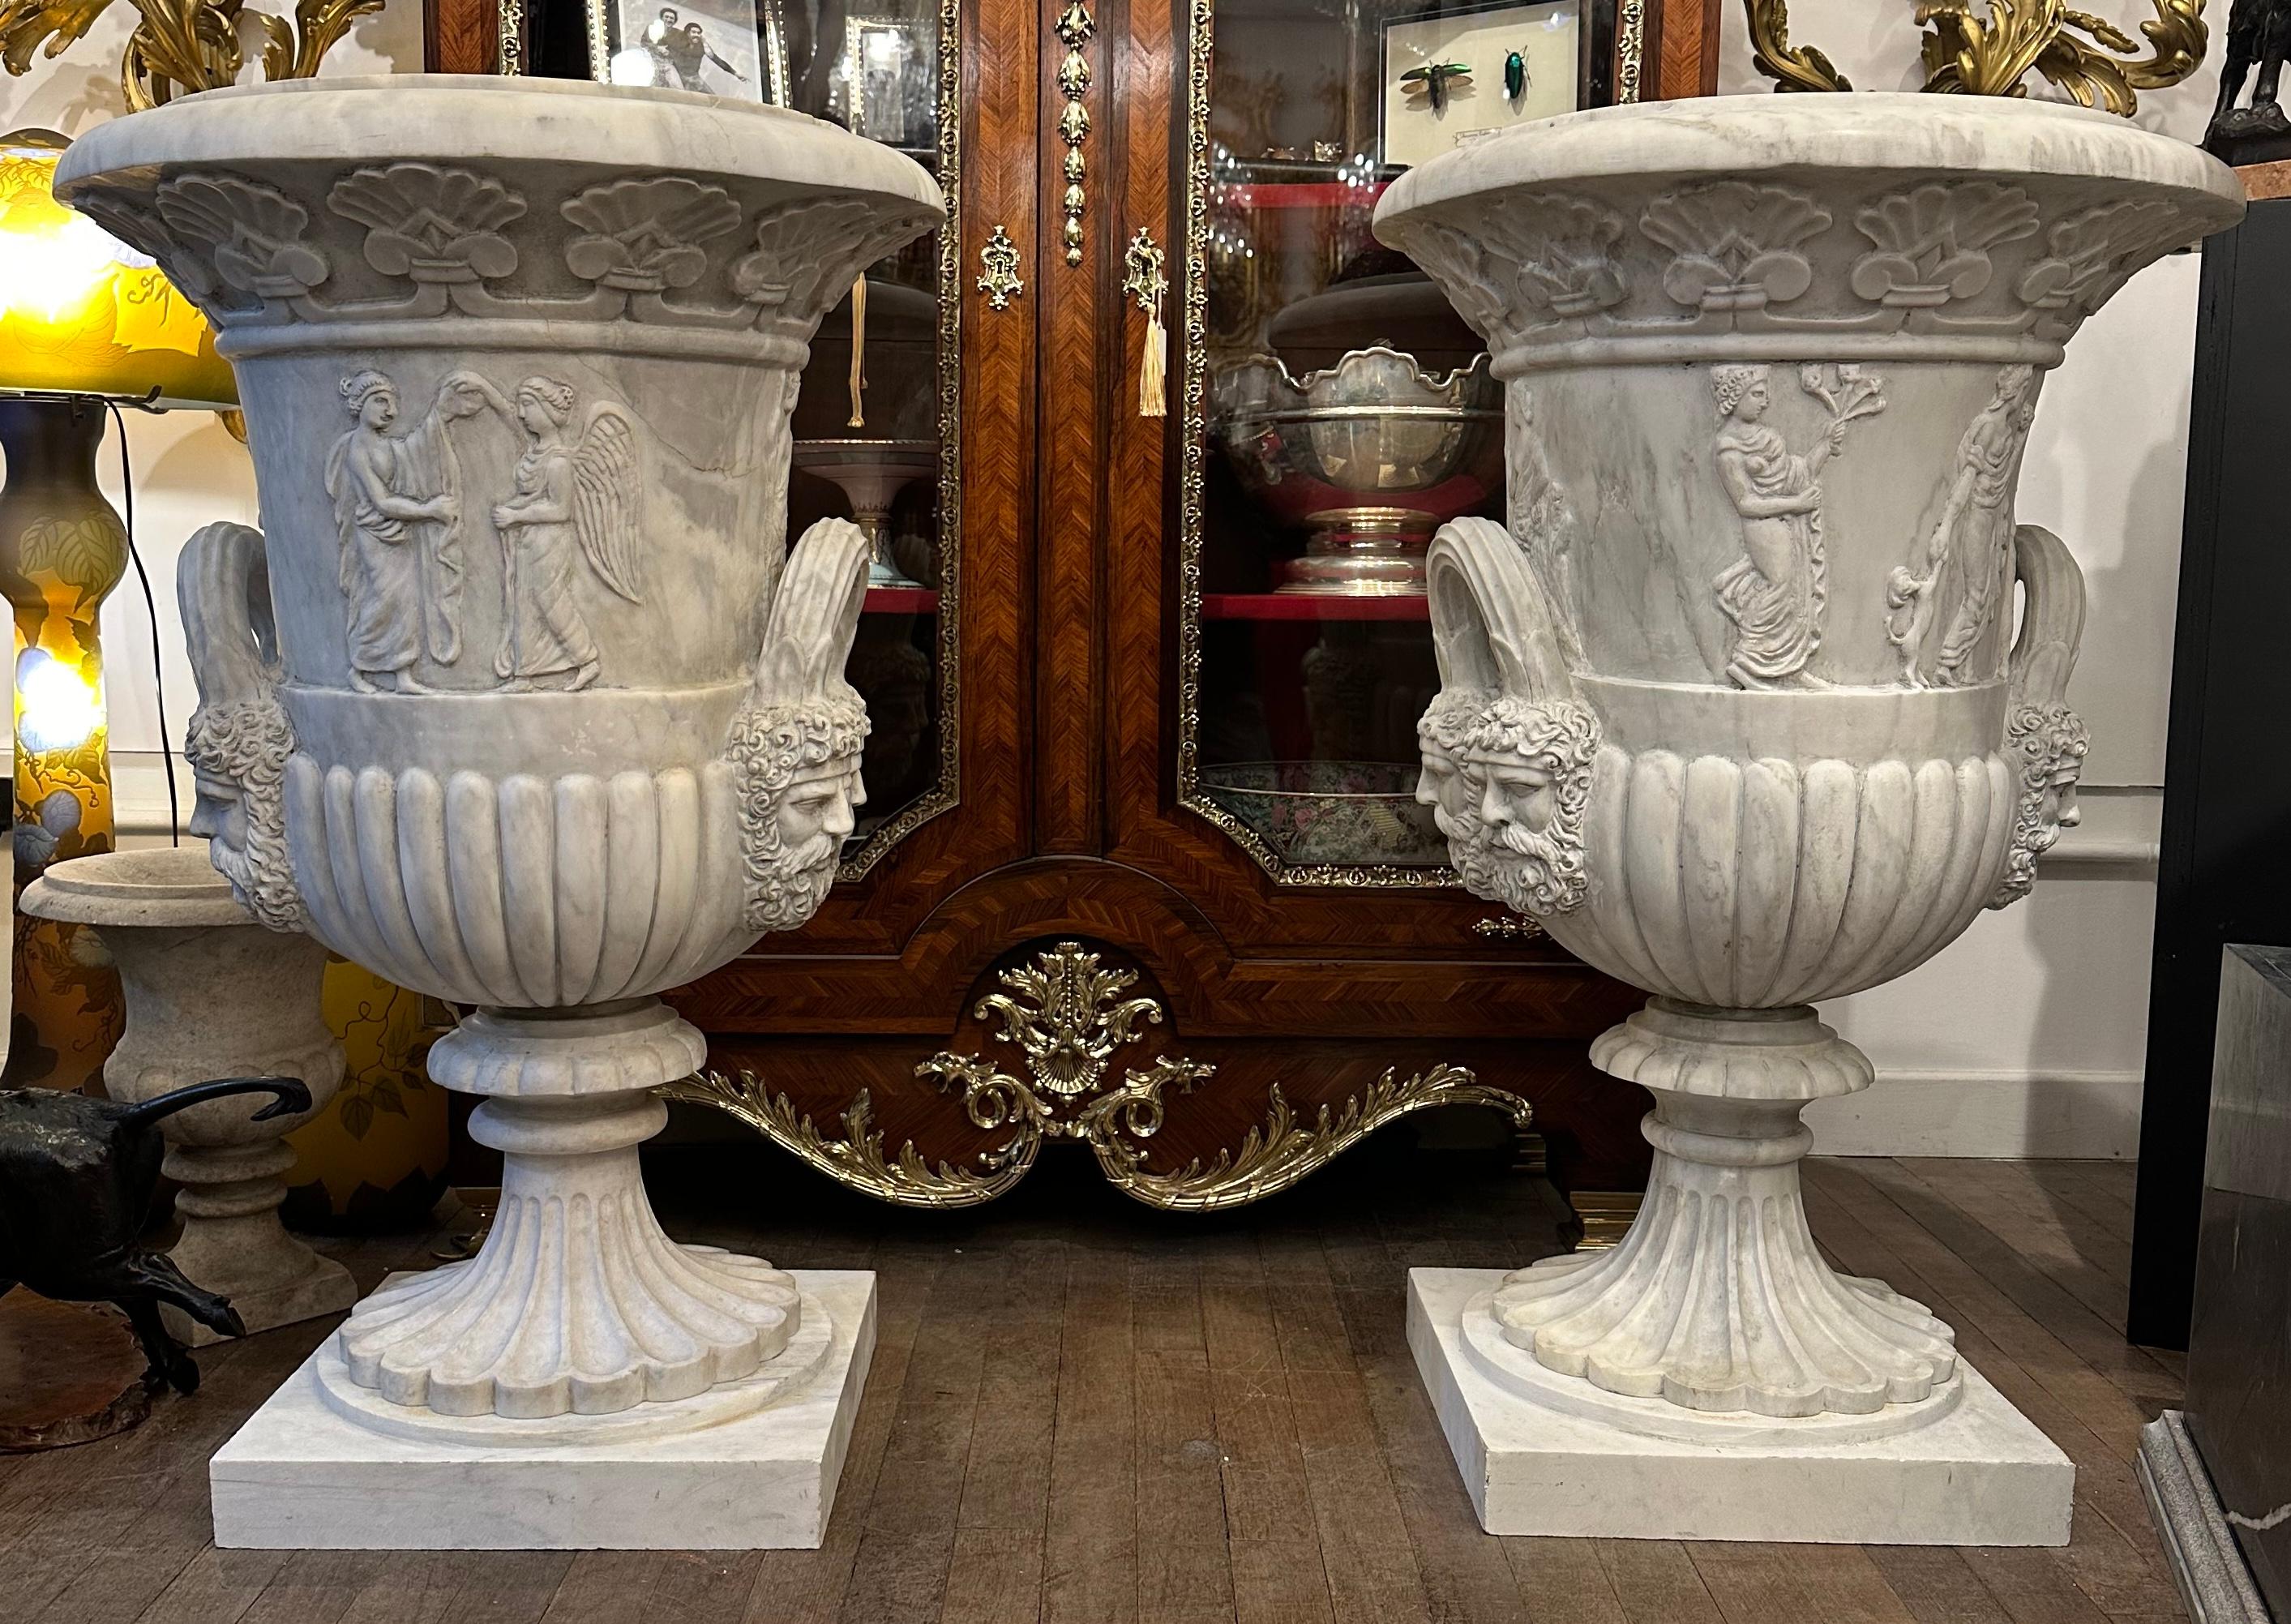 A highly decorative and imposing pair of marble hand-carved urns. Depicting a classical scene including dogs and winged figures which make up the middle section of the urn, with exquisitely carved and bearded heads beneath. The top section has